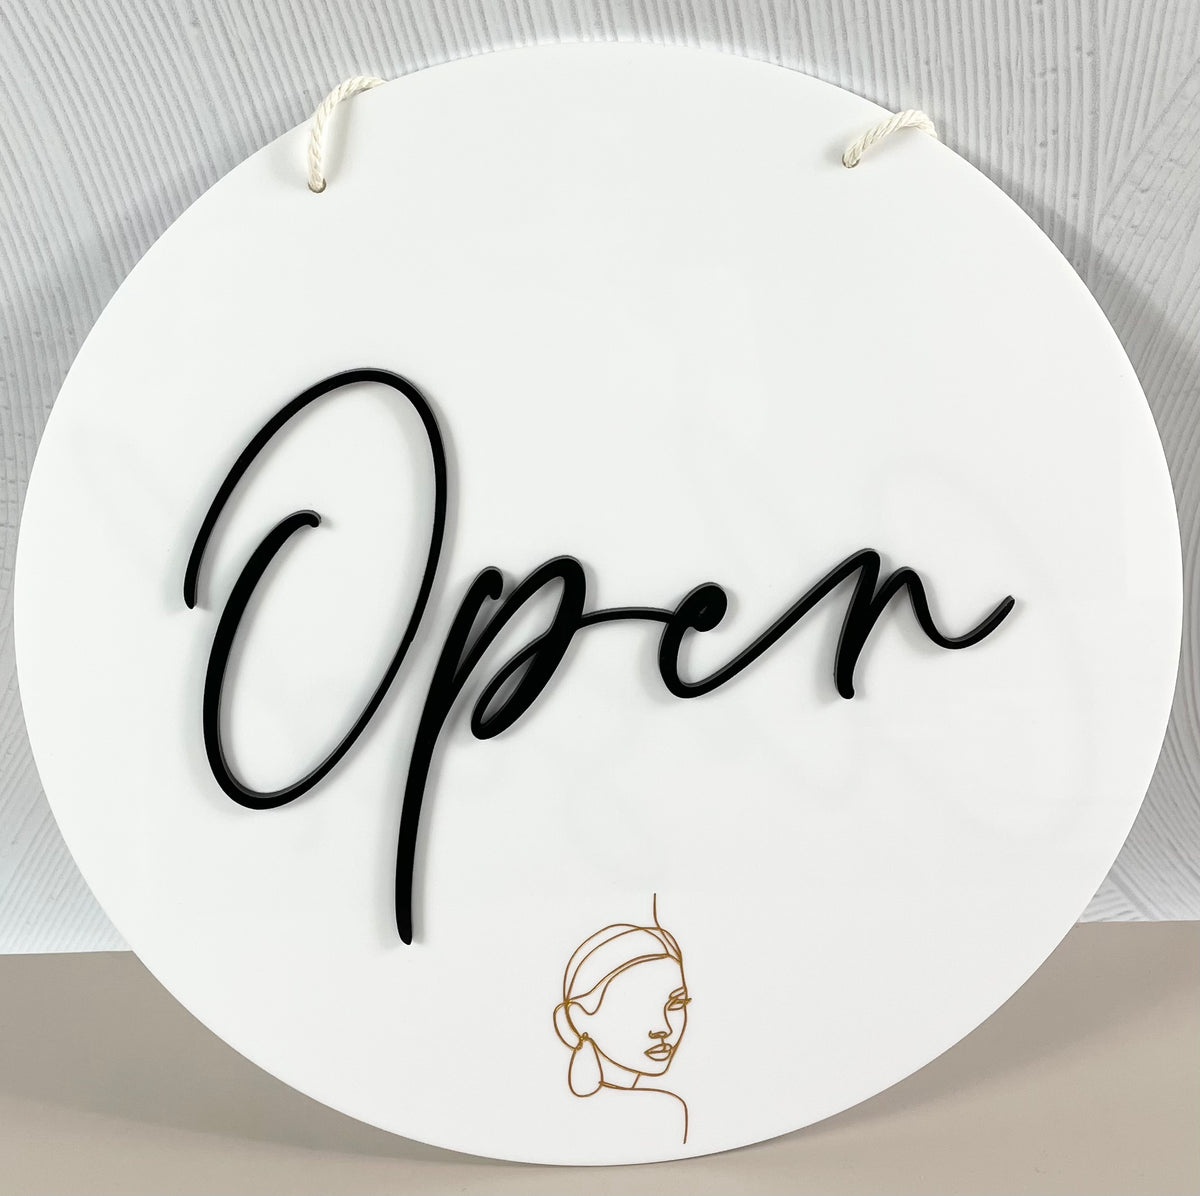 open sign